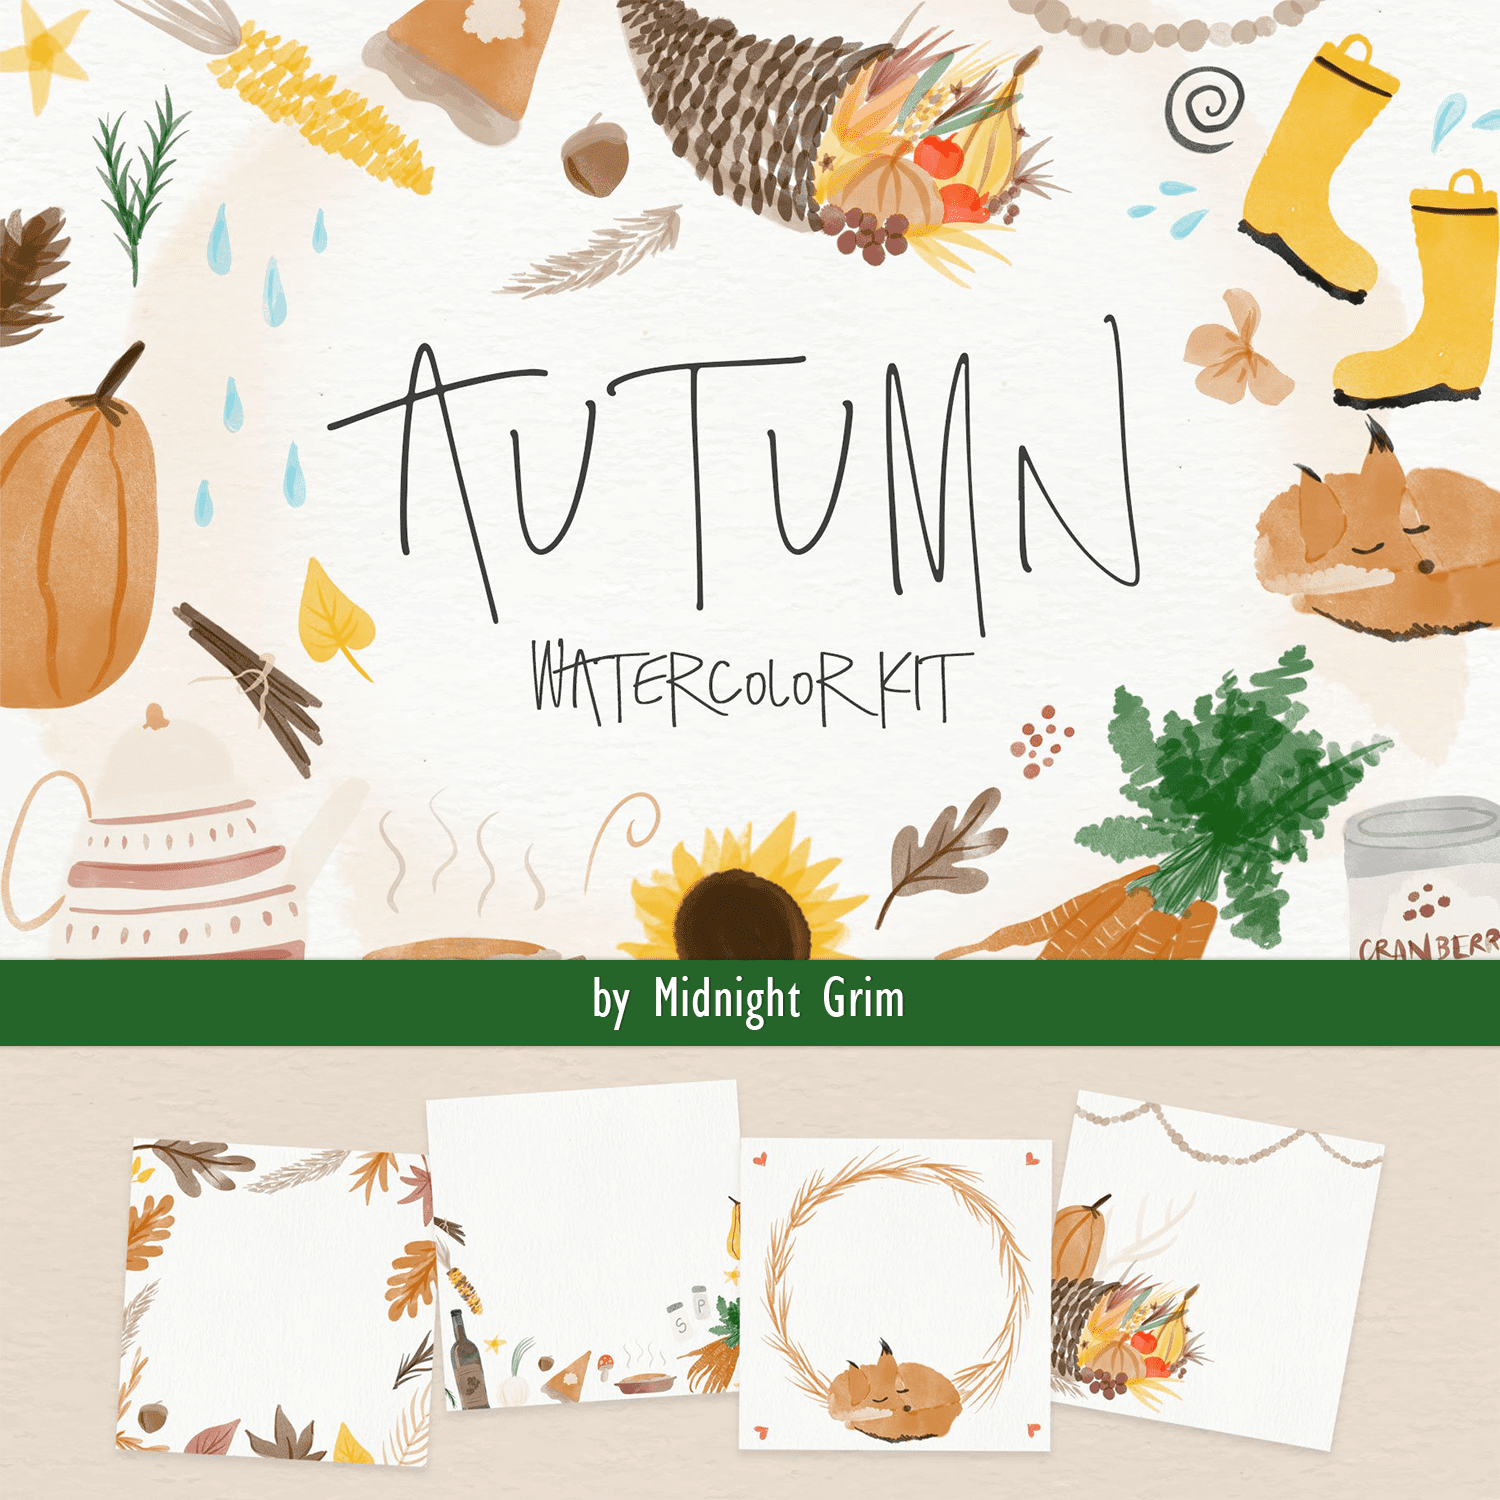 Autumn Watercolor Kit cover.